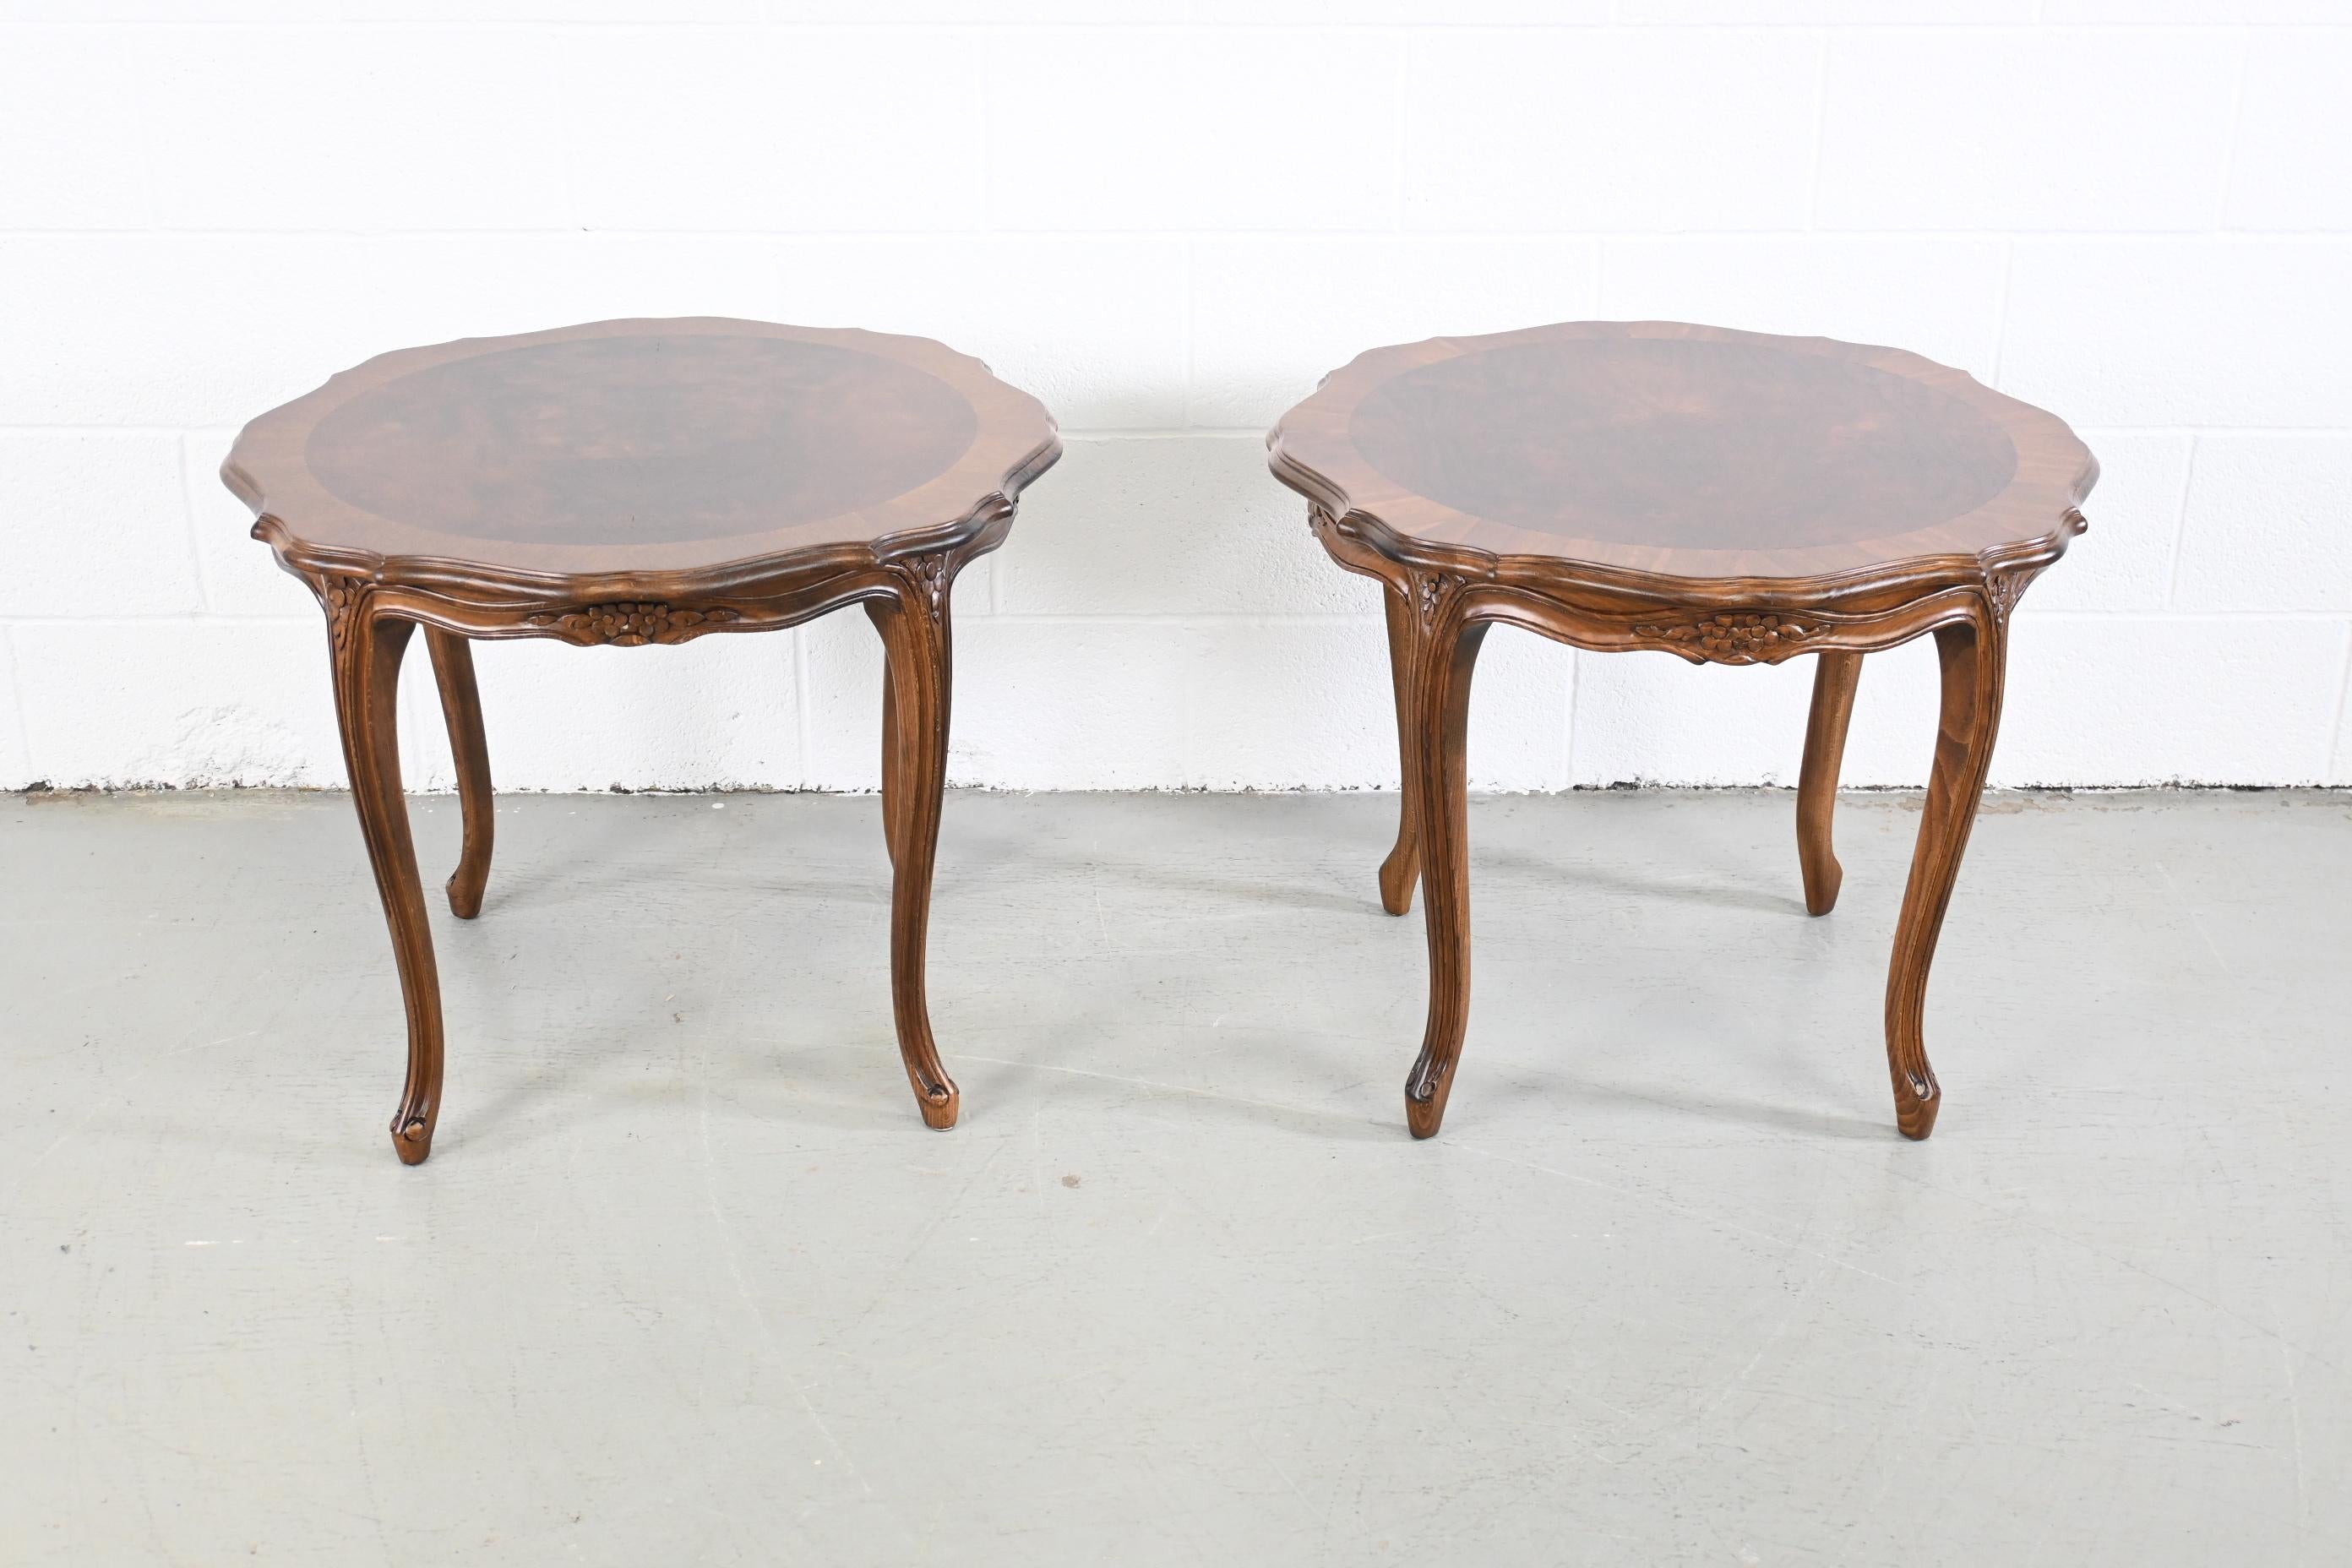 Karges Furniture French Provincial Burled walnut side or end tables, a pair

Karges Furniture, USA, 1980s

Measures: 27.75 Wide x 27.75 Deep x 22.25 High.

French provincial style carved pair of side or end tables with burled walnut